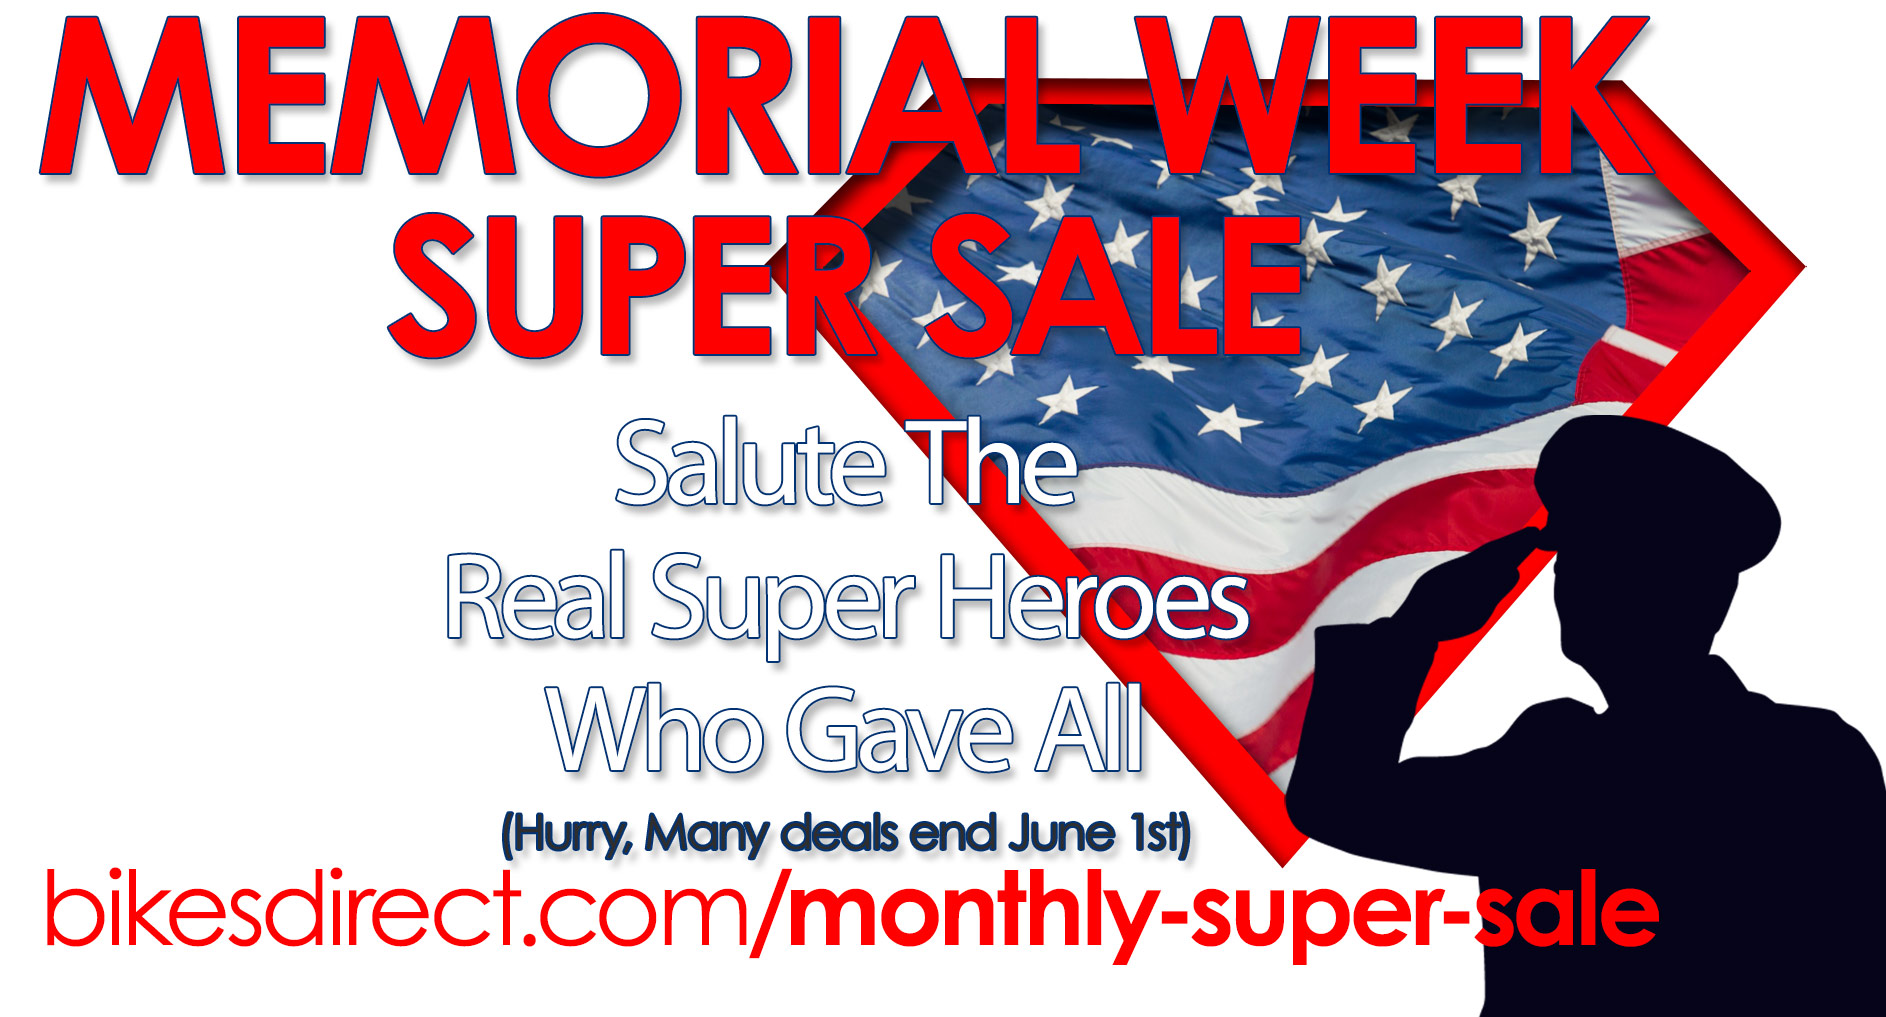 MEMORIAL WEEK SUPER SALE
Surprise Deals (Not Just Bikes)
Many NEVER SEE BEFORE

Top Rated Full Suspension, Road, Gravel, Hybrid
Pro to Entry Level Specs, Save Up to 73% Off* 

Incredible Sale Prices on New Bikes